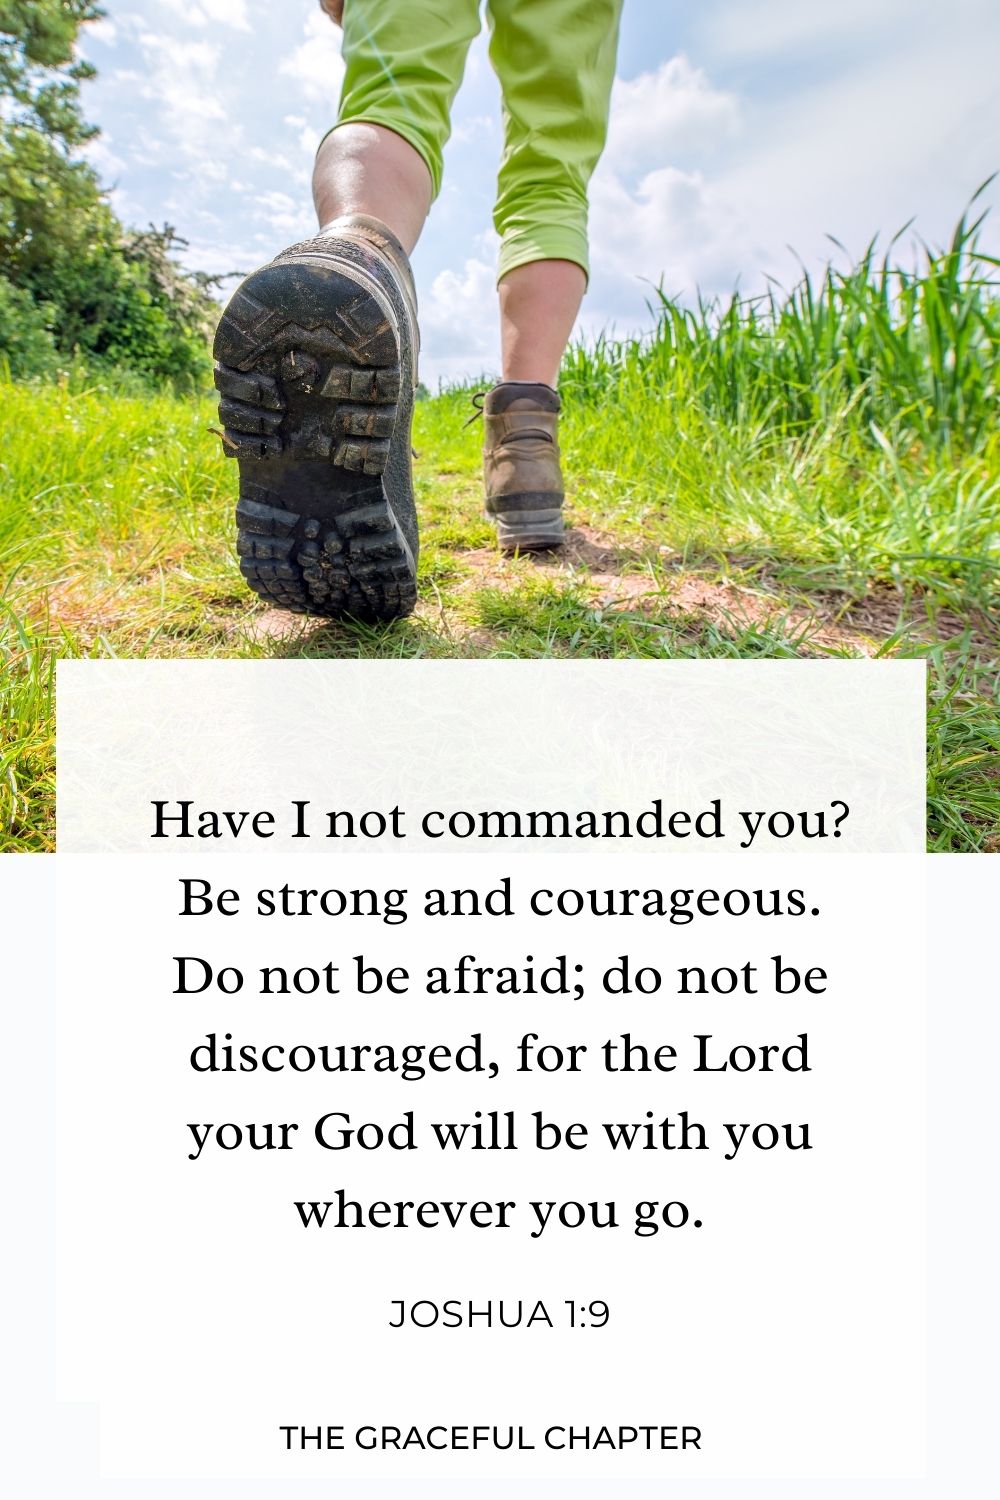 Have I not commanded you? Be strong and courageous. Do not be afraid; do not be discouraged, for the Lord your God will be with you wherever you go. Joshua 1:9 ﻿